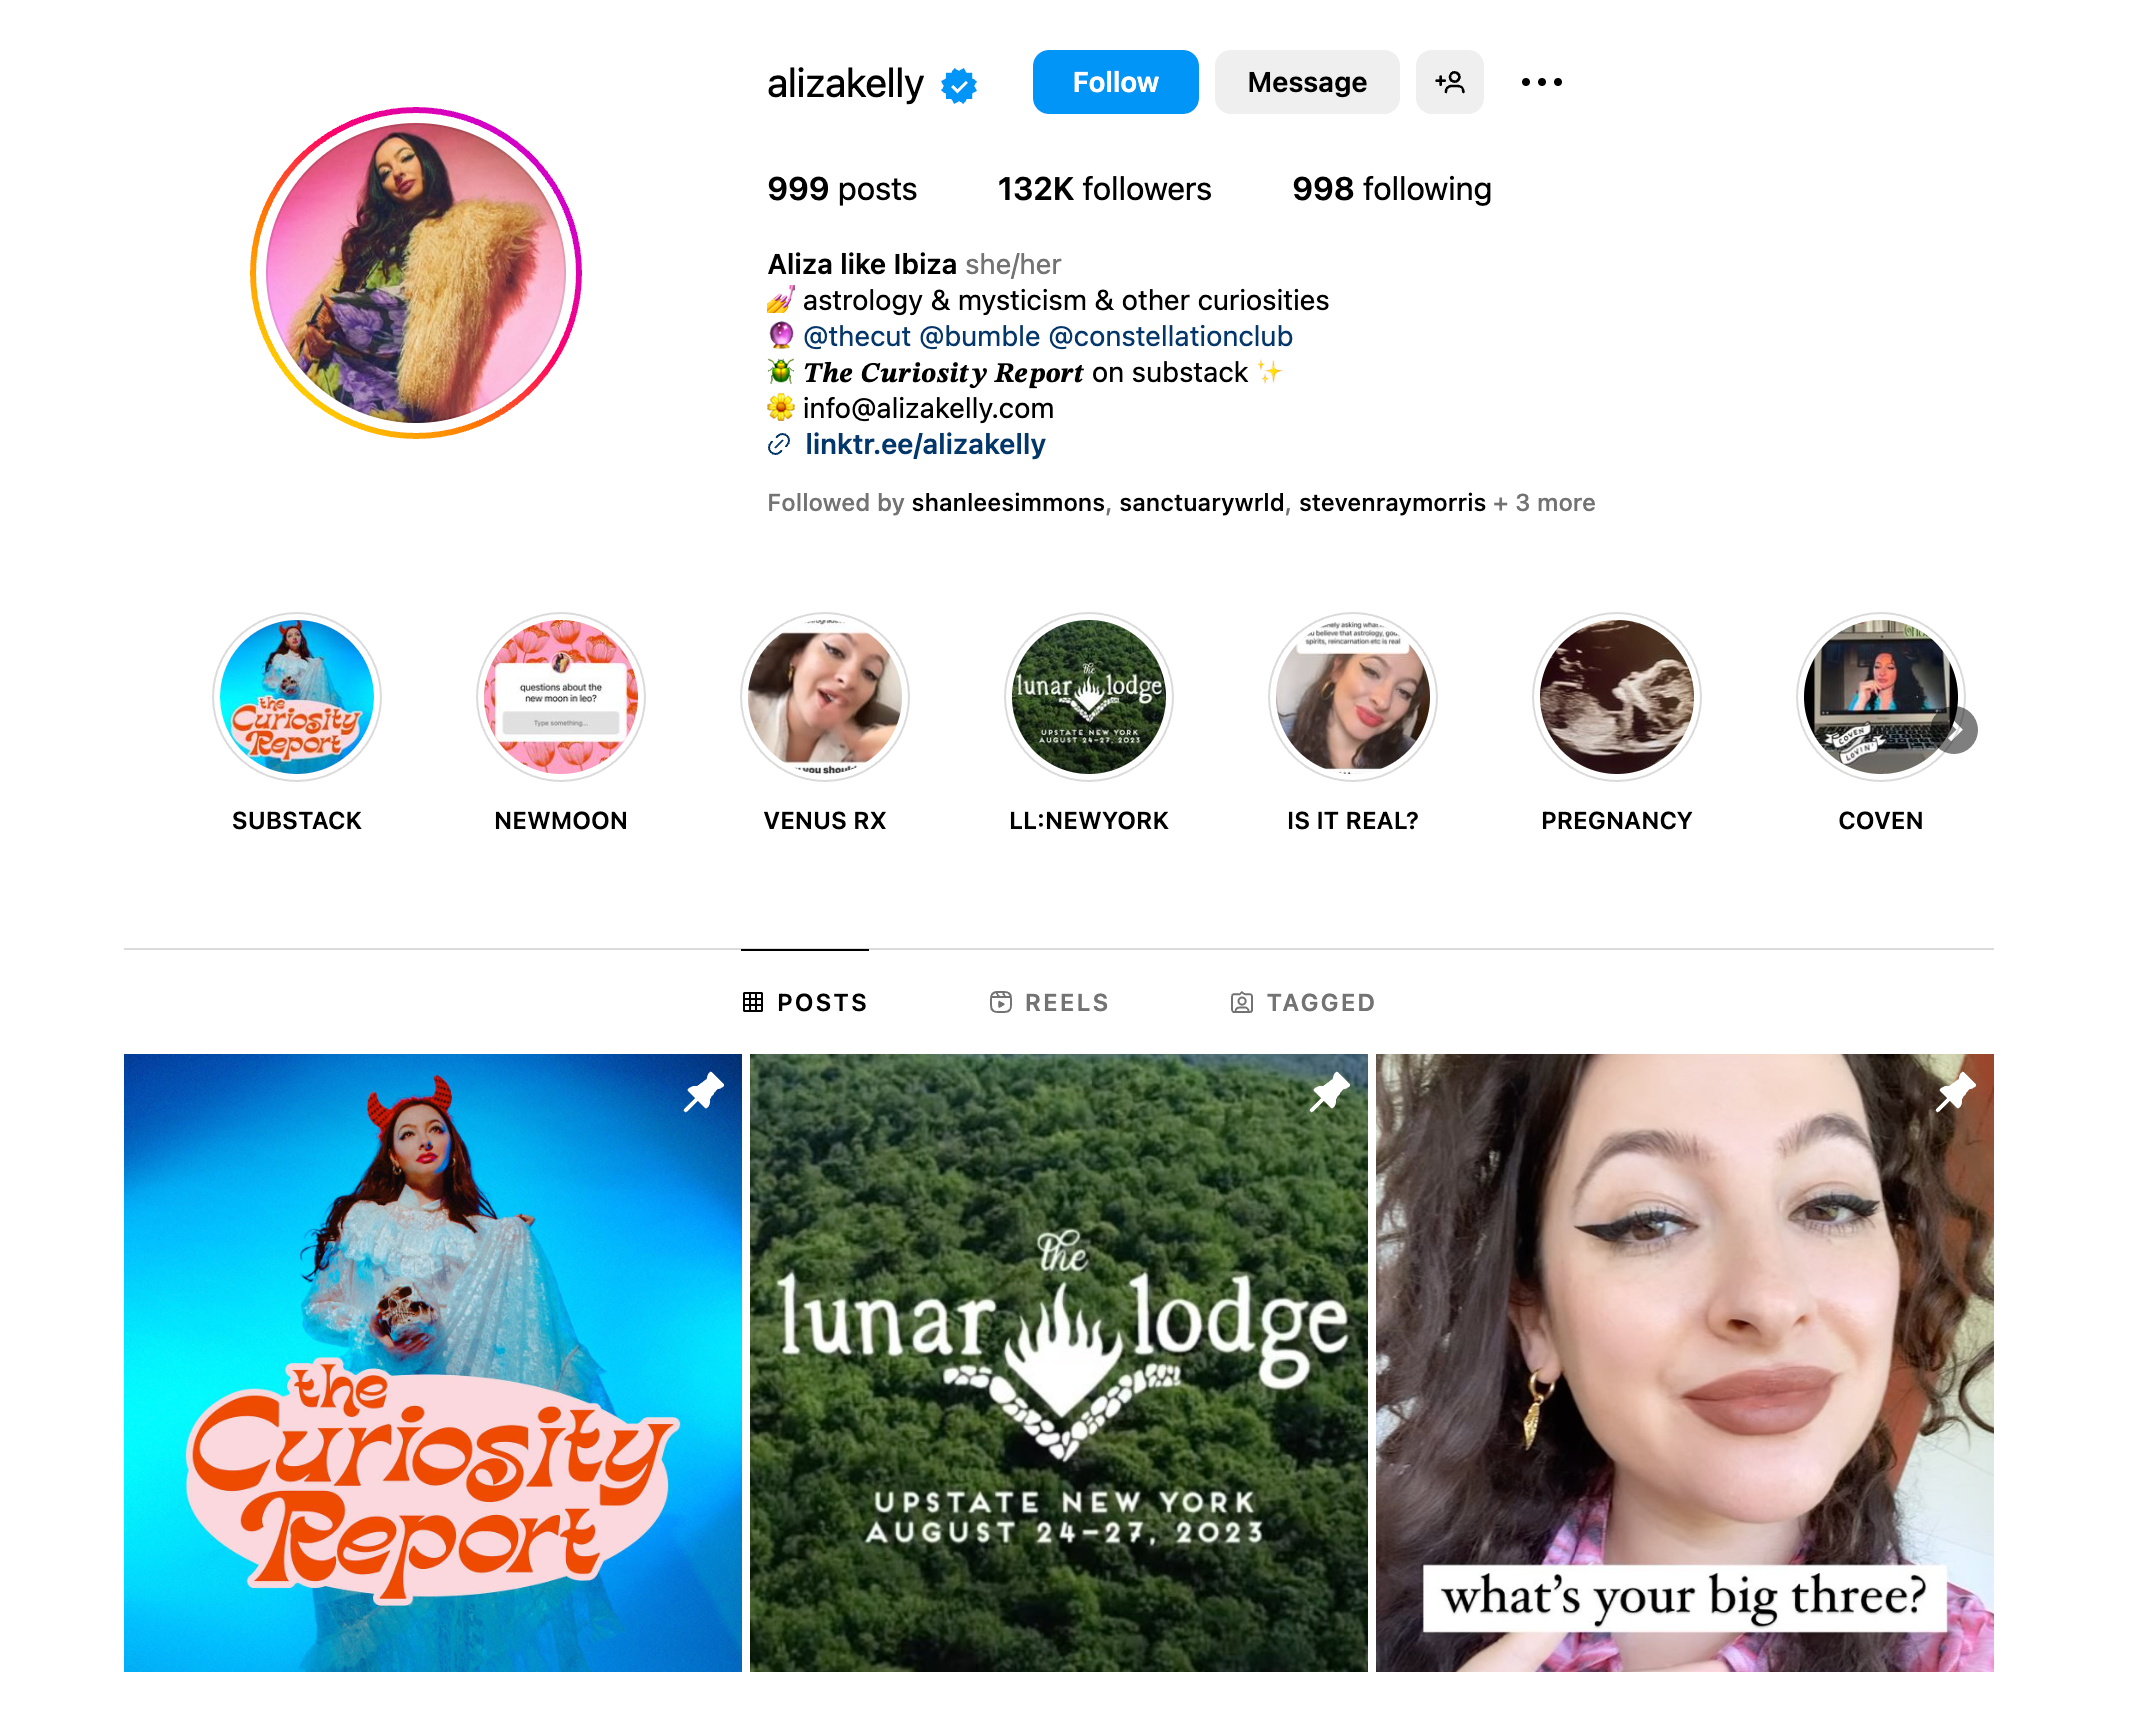 Instagram profile page and bio showing subscriptions to make money on Instagram